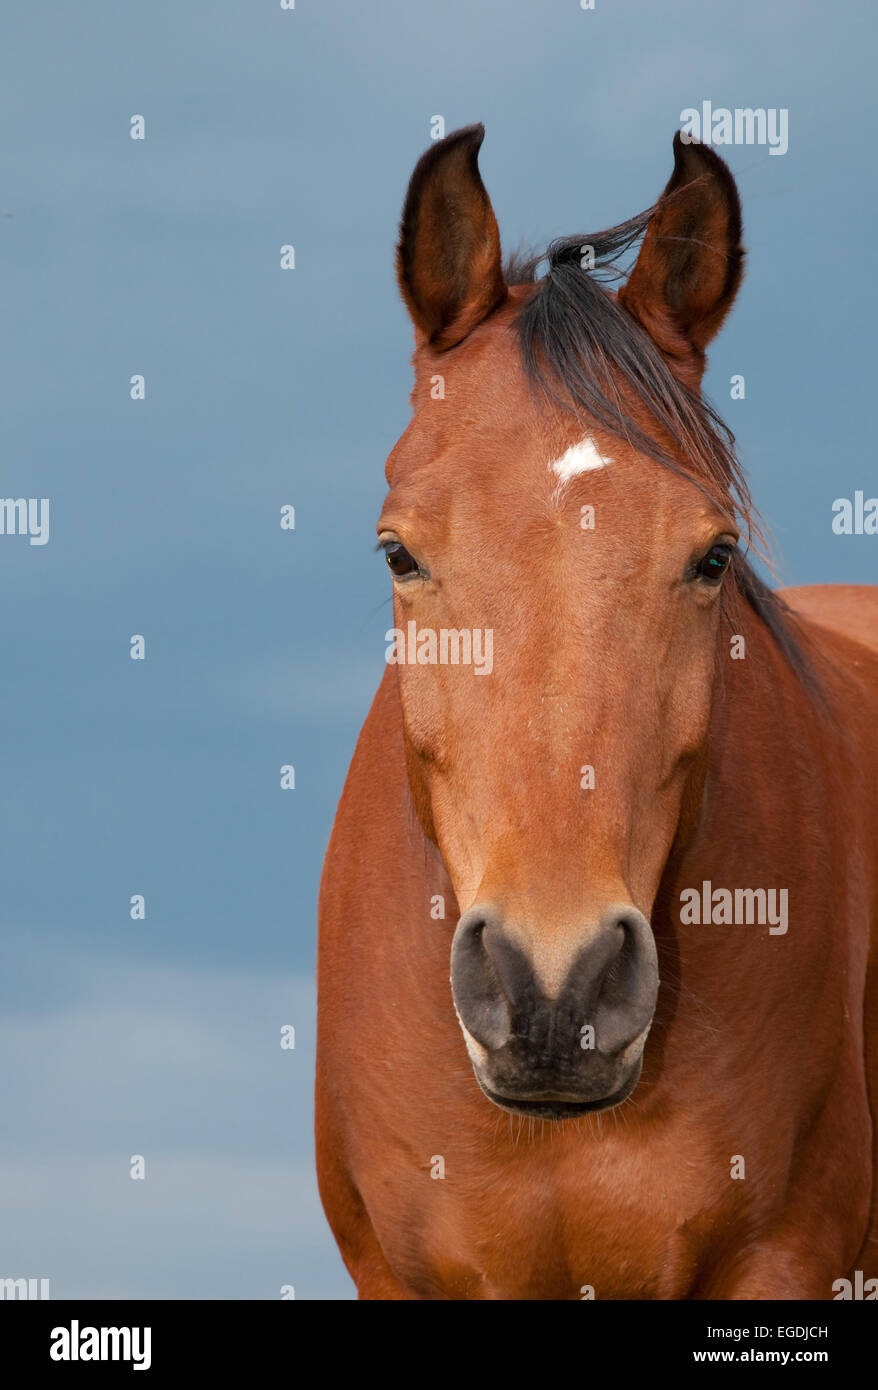 Head on -image of a bay Arabian with a small star against dark cloudy sky Stock Photo